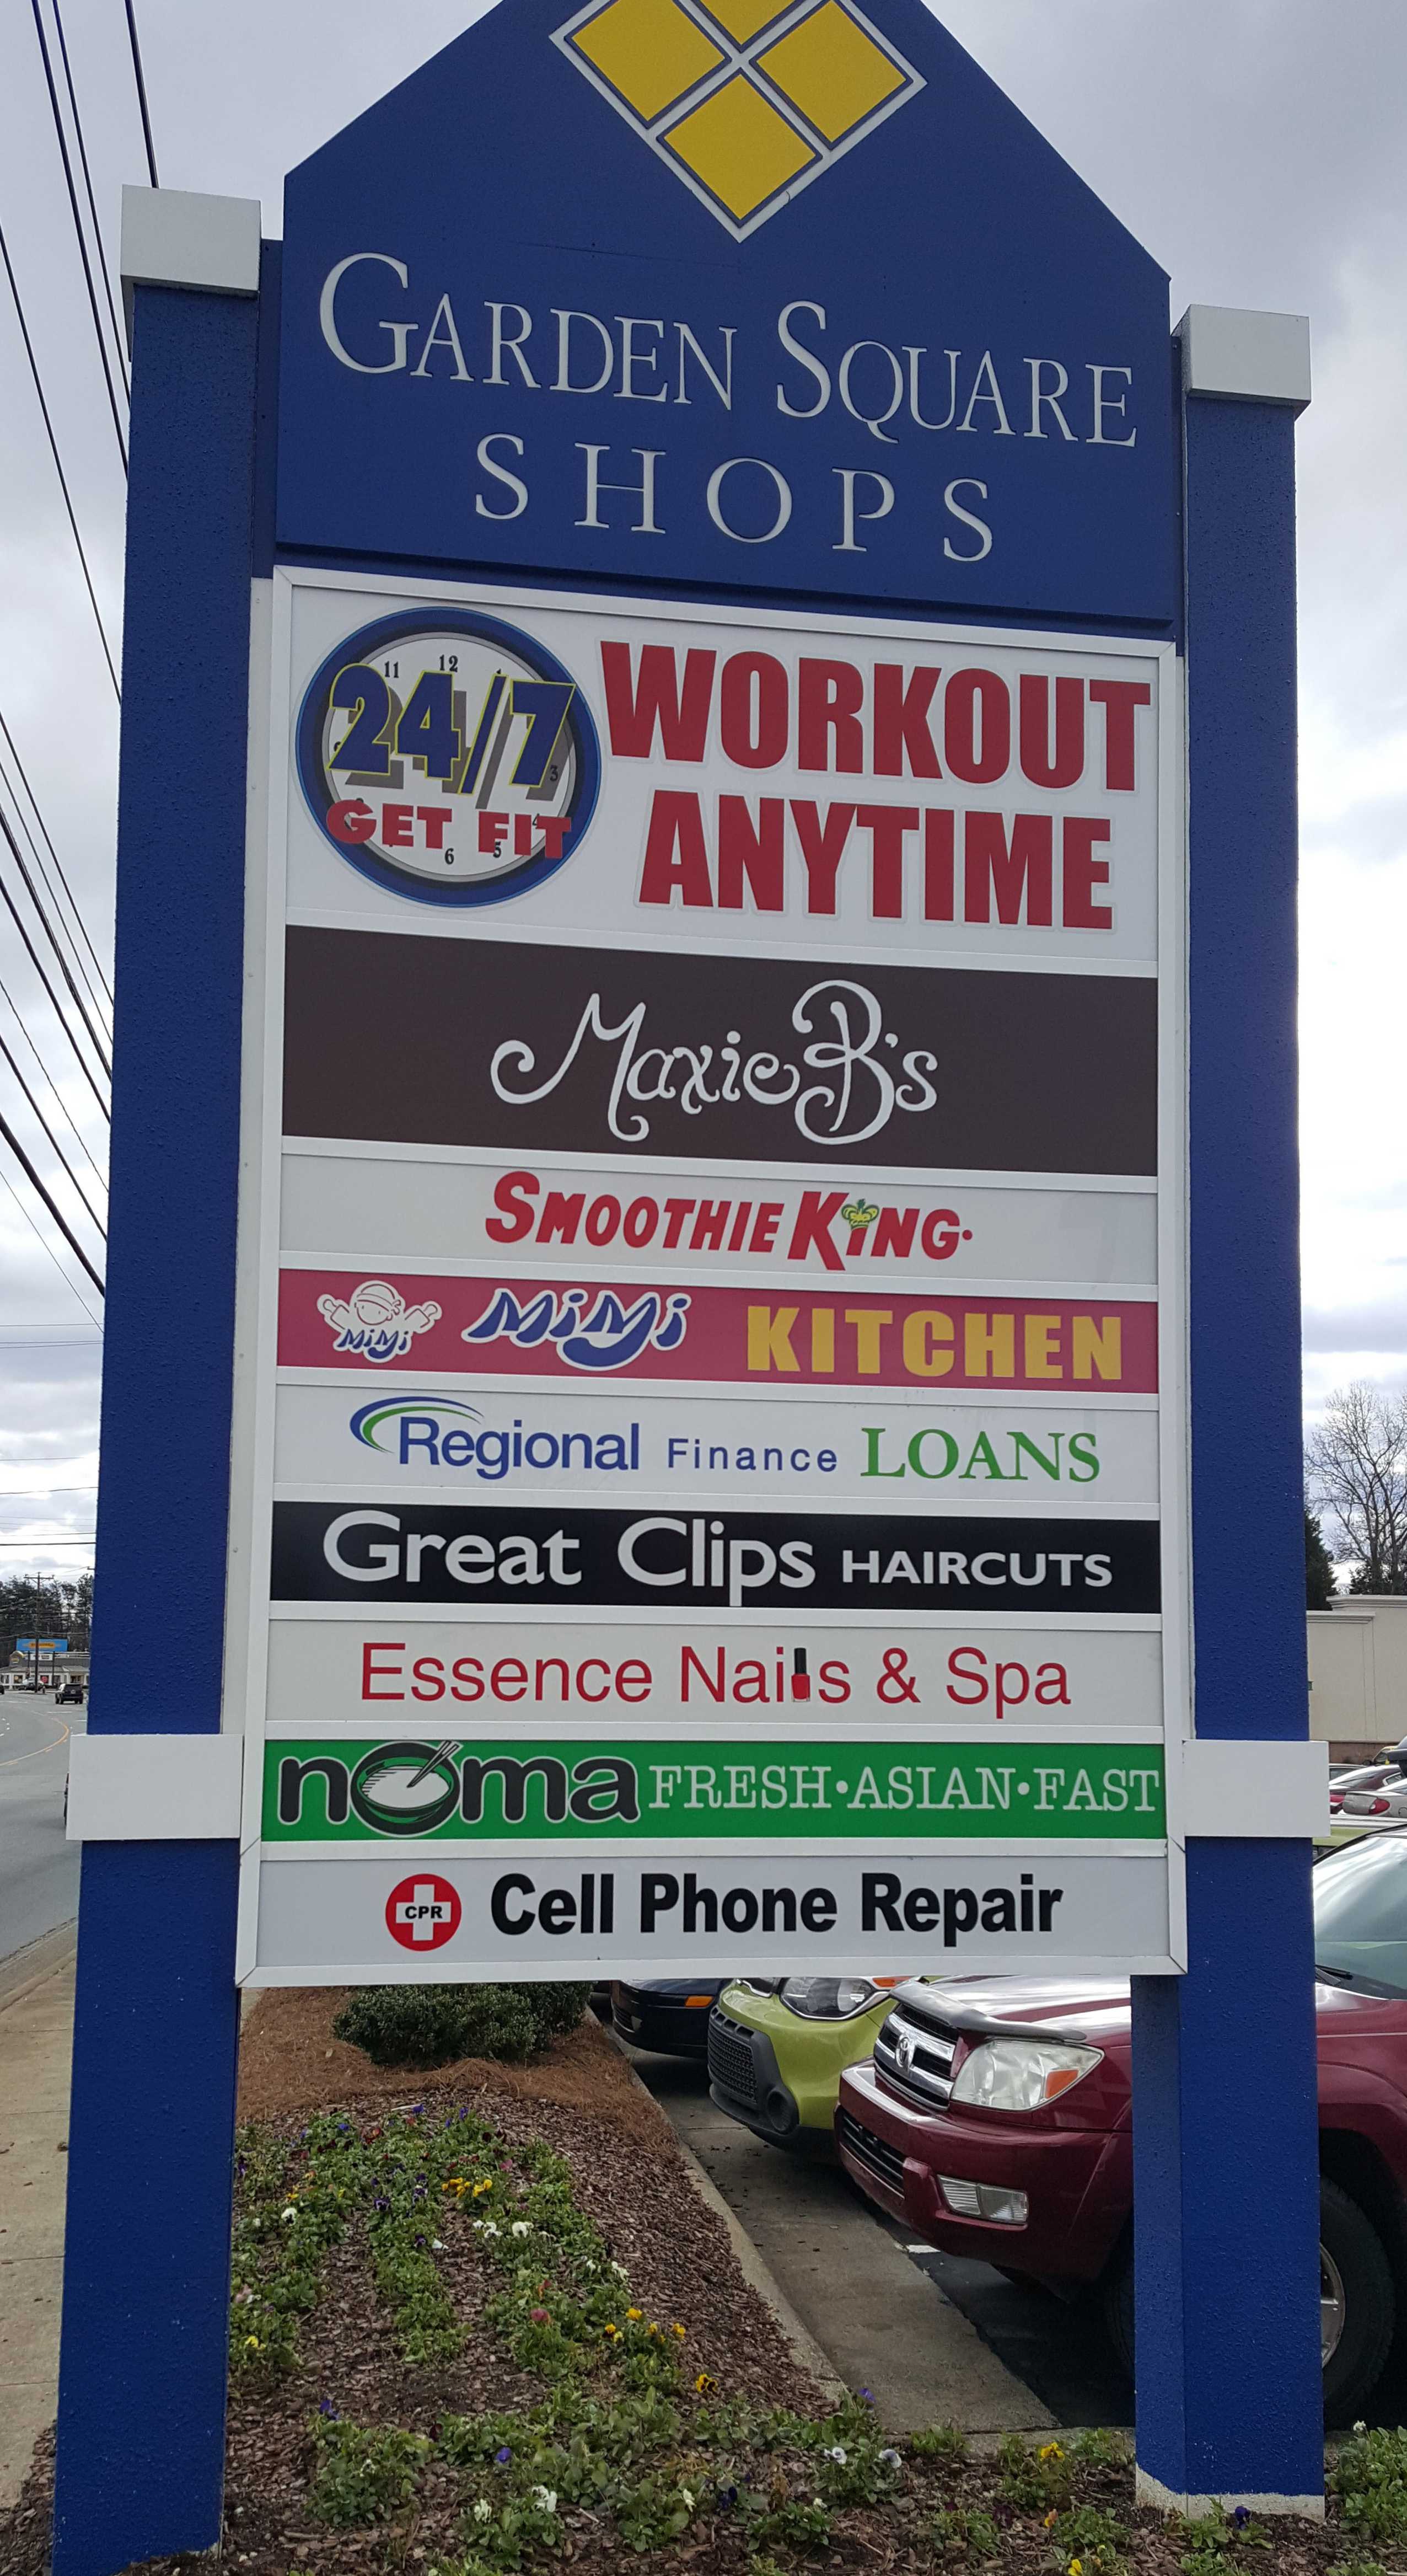 CPR Cell Phone Repair - Signs Unlimited